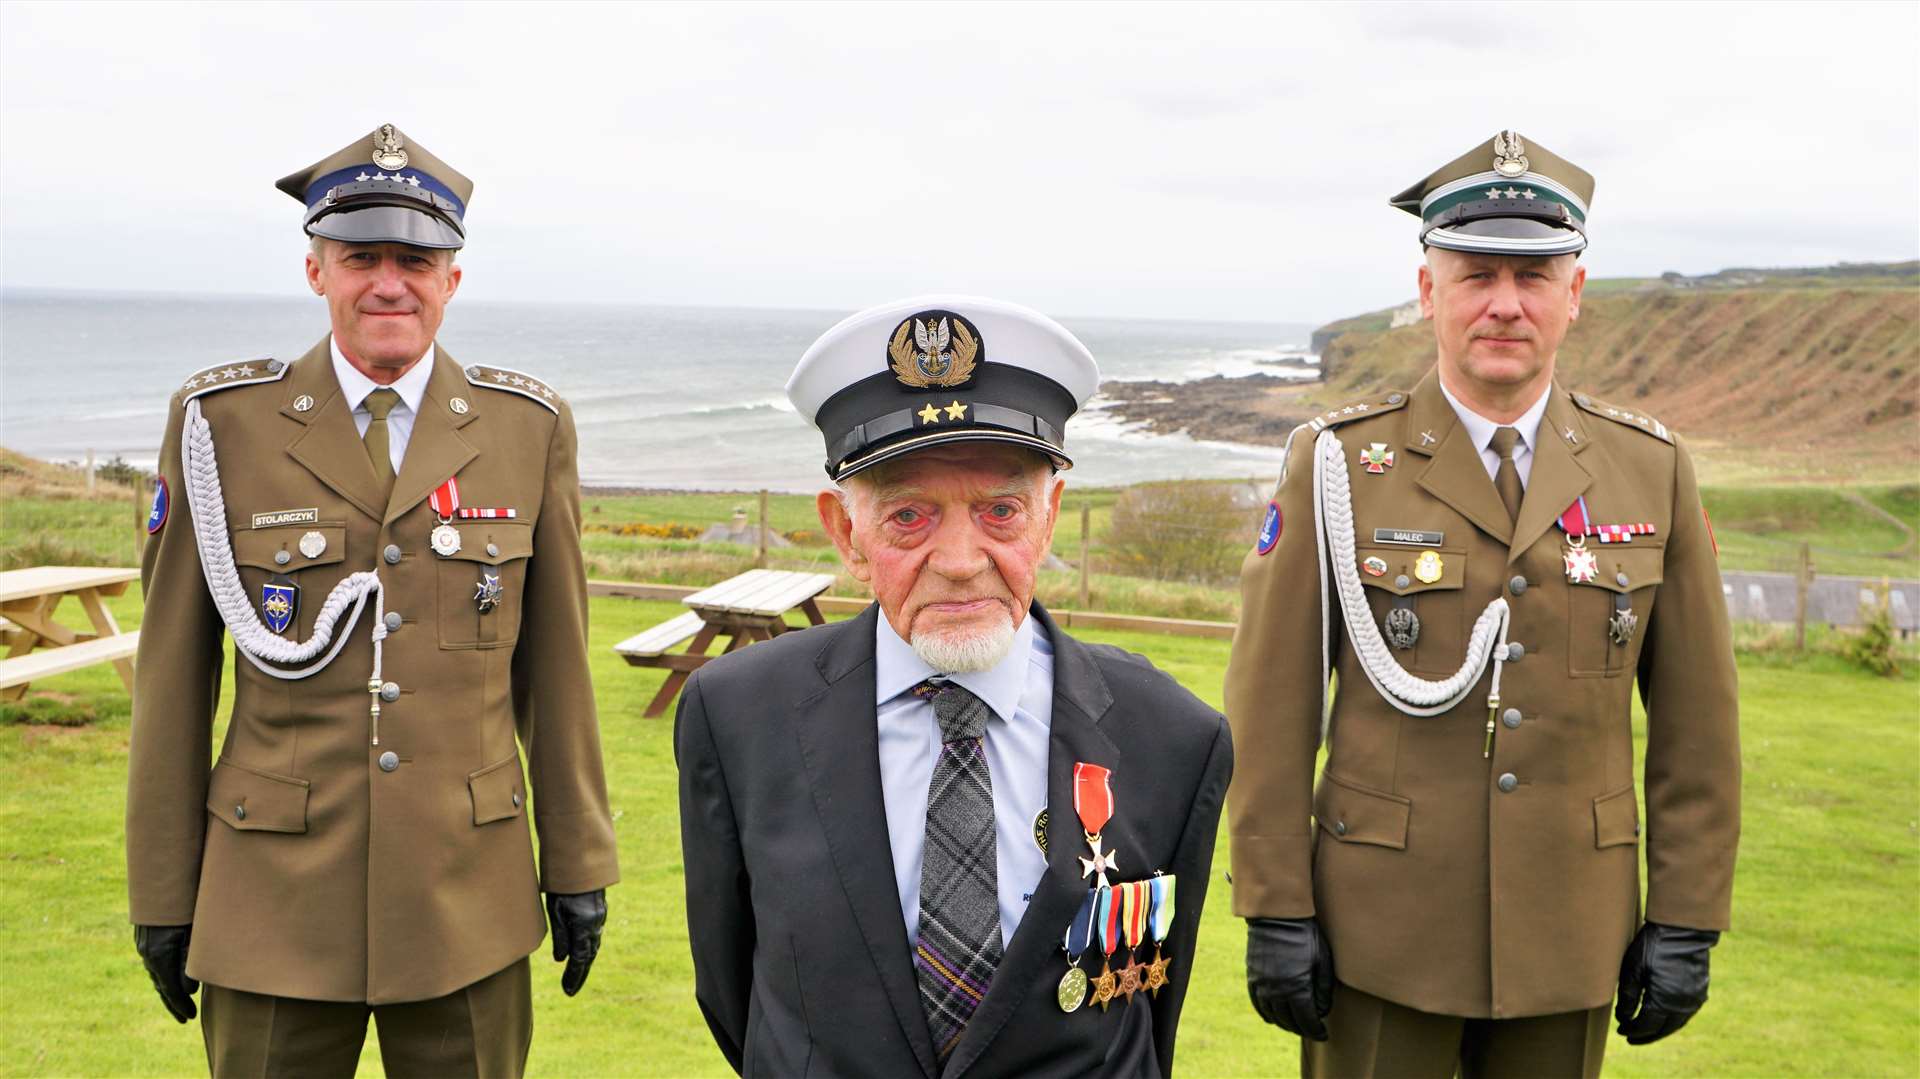 From left, Polish defence attaché Colonel Mieczysław Malec, Richard Polanski wearing his honorary naval hat, and Polish warrant officer Krzysztof Stolarczyk. Picture: DGS